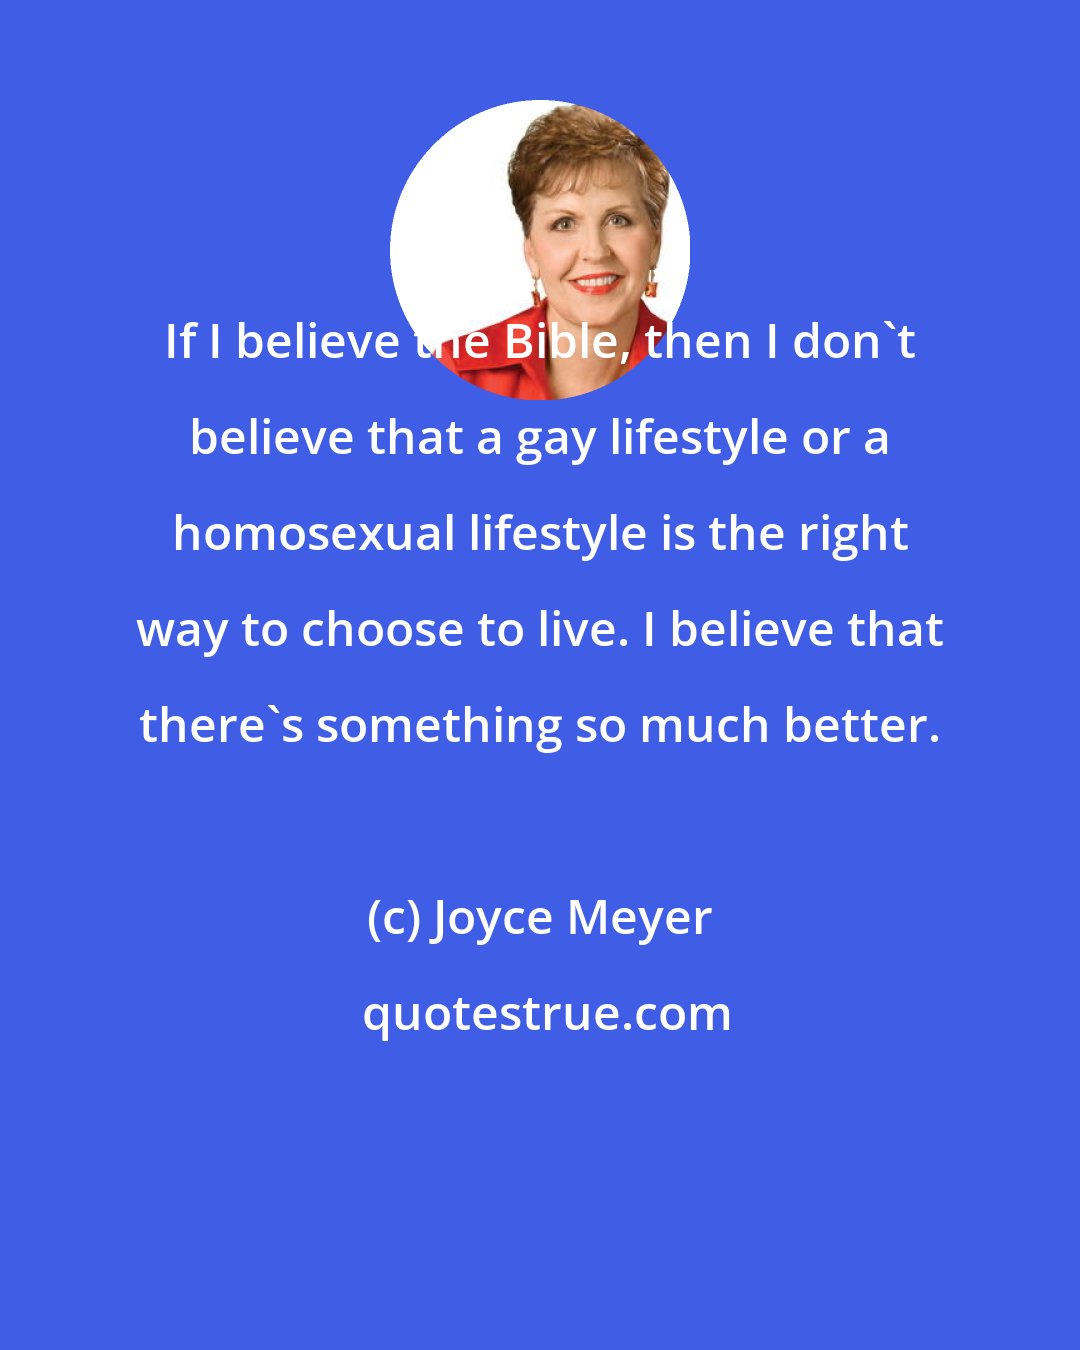 Joyce Meyer: If I believe the Bible, then I don't believe that a gay lifestyle or a homosexual lifestyle is the right way to choose to live. I believe that there's something so much better.